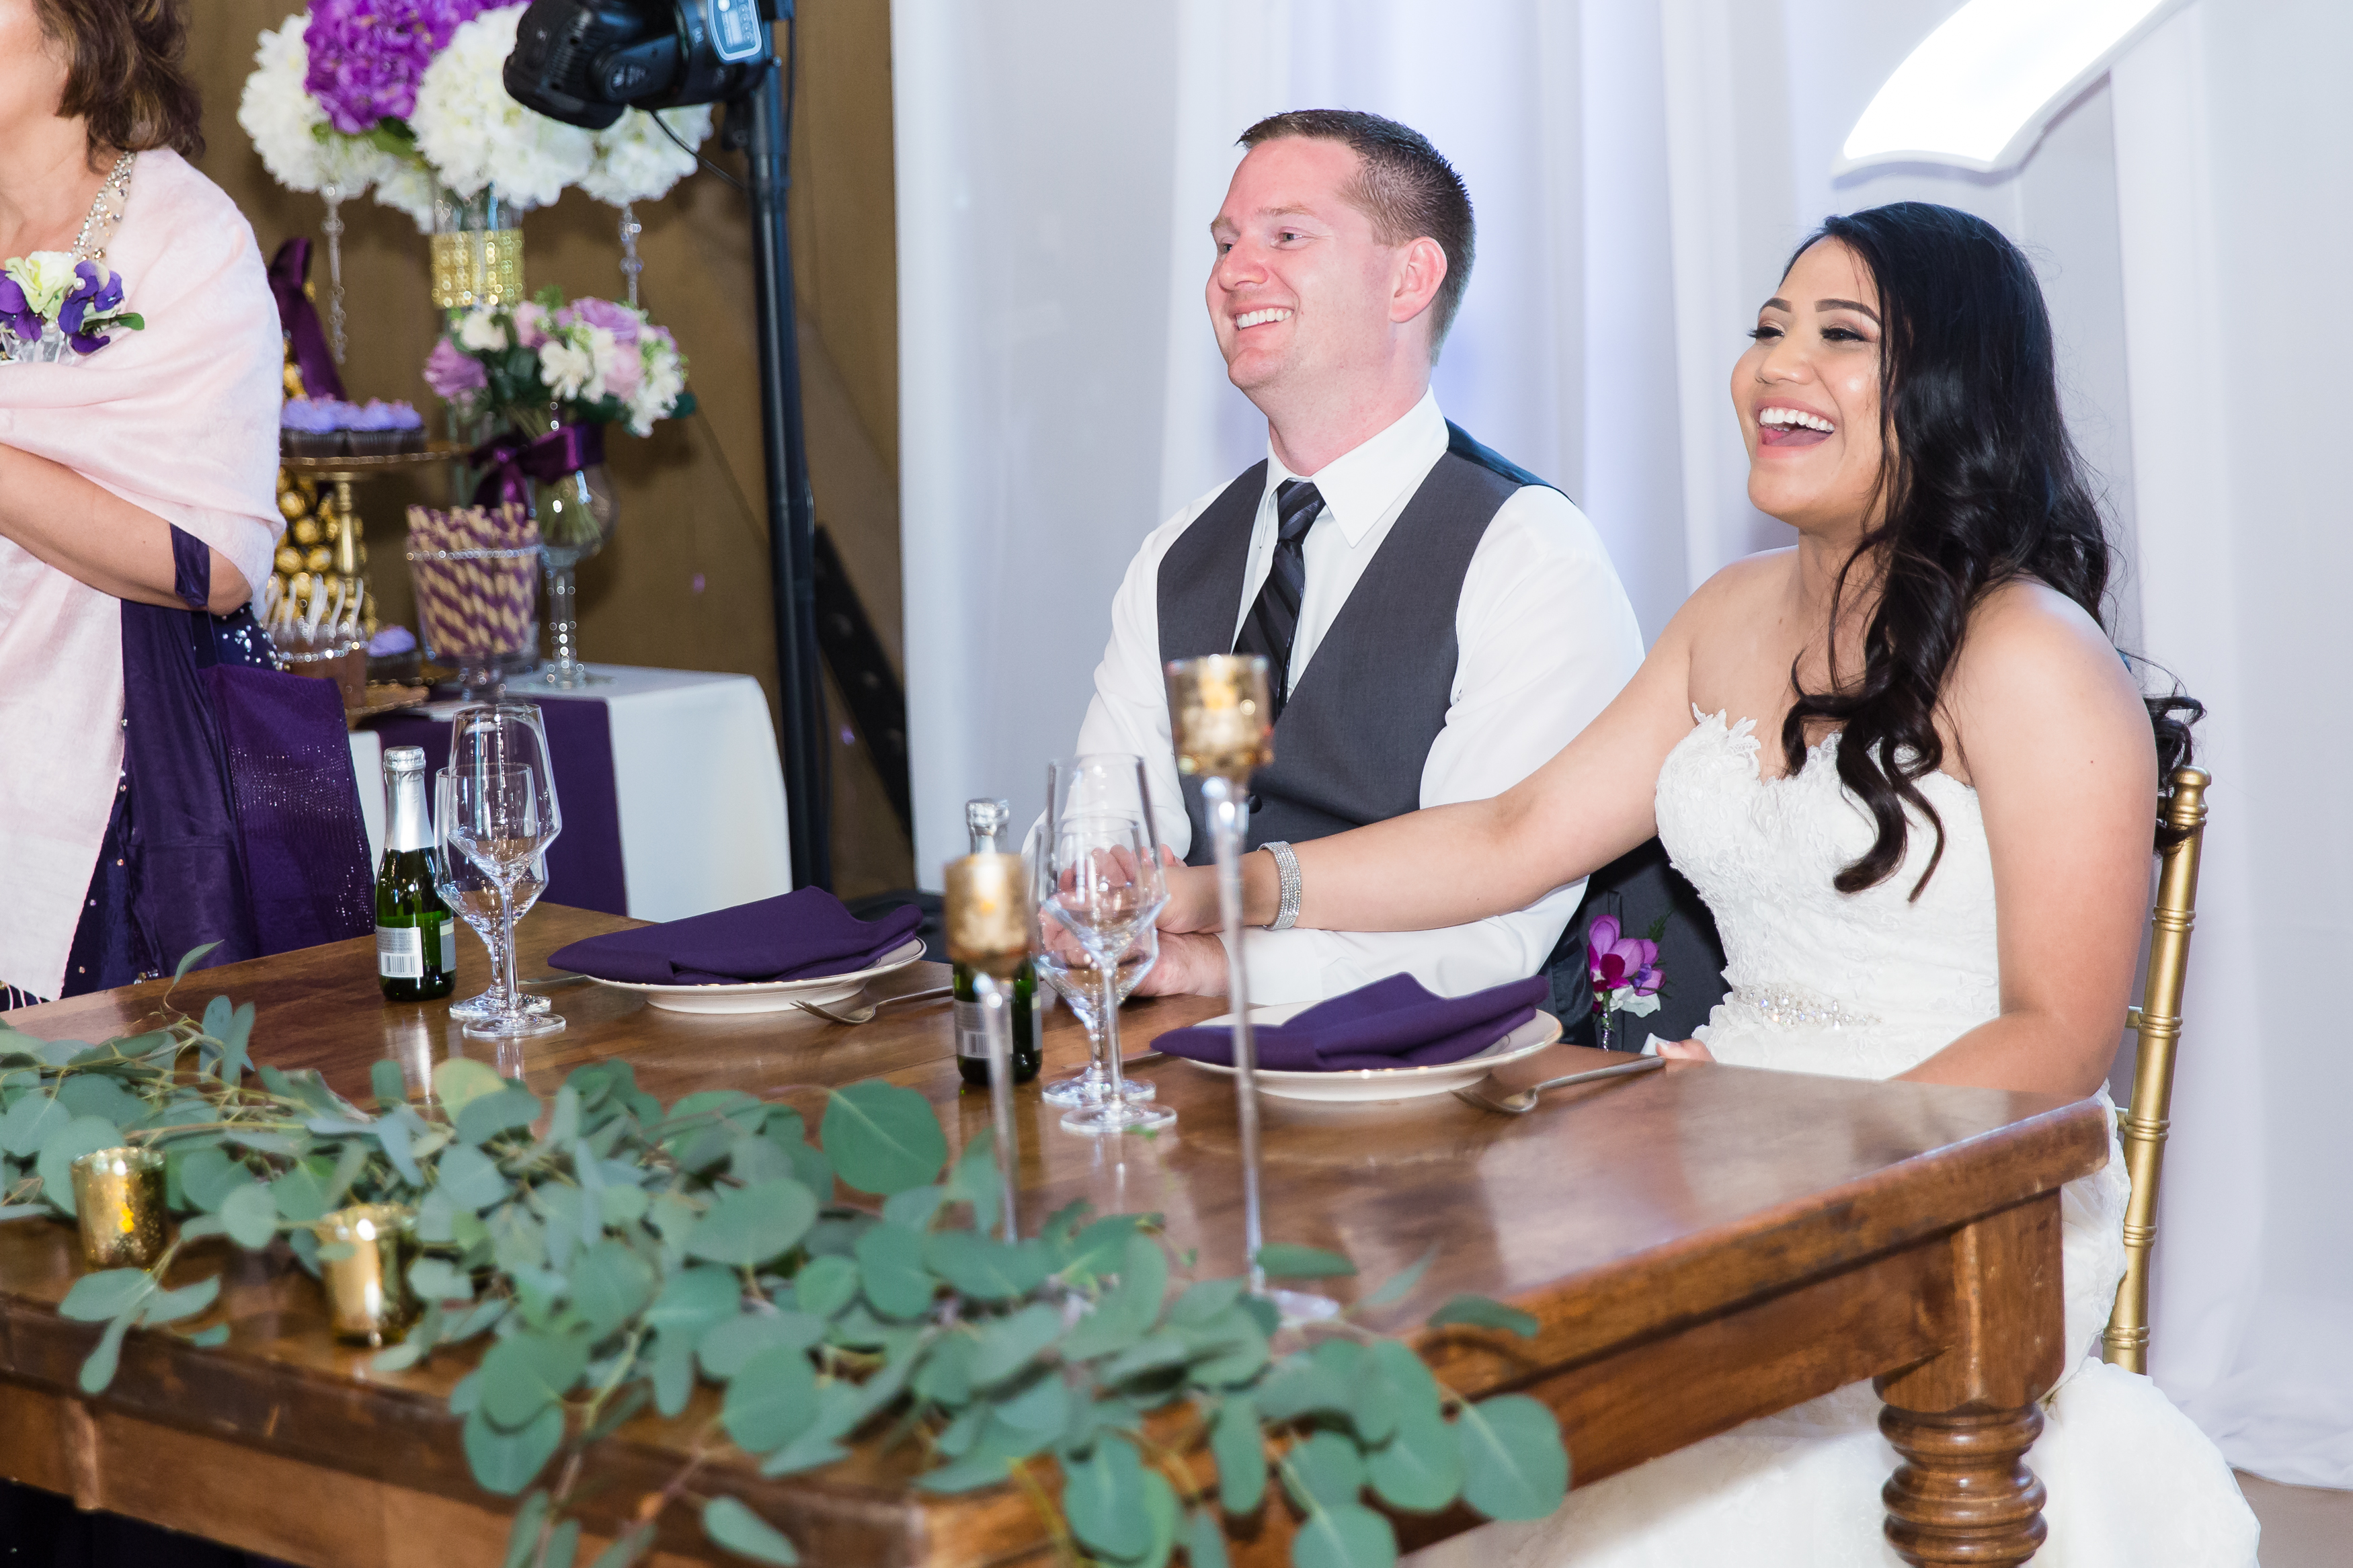 Bride and groom laughing at sweetheart table during reception